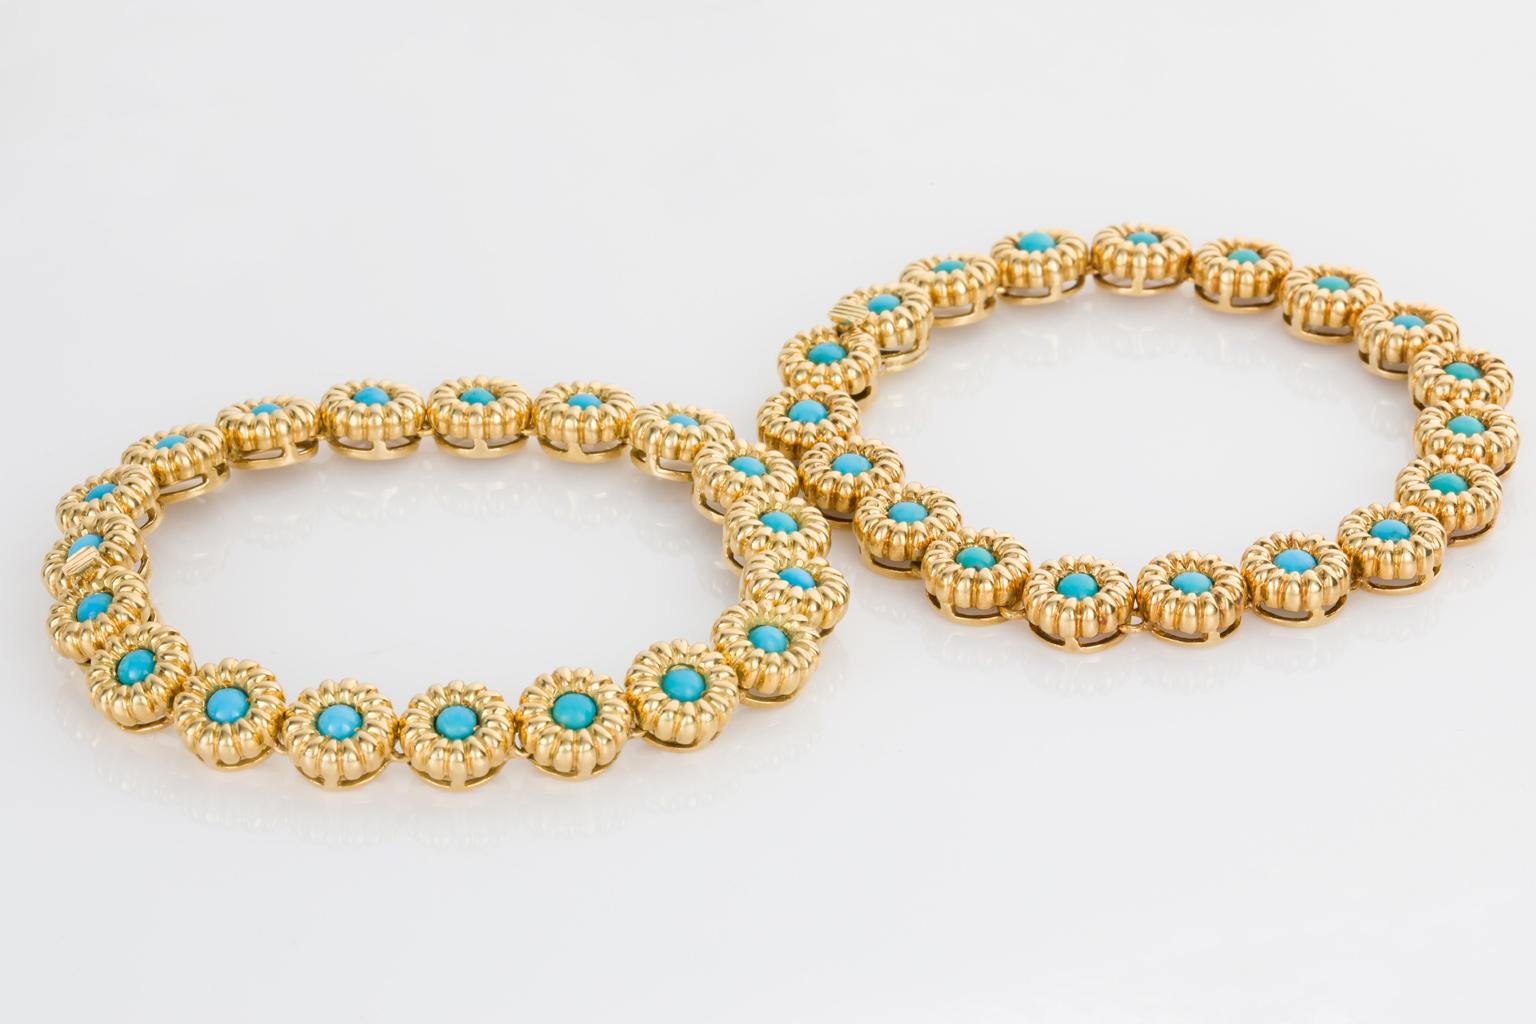 18 Karat Yellow Gold Turquoise Bracelets or Choker Necklace For Sale 2